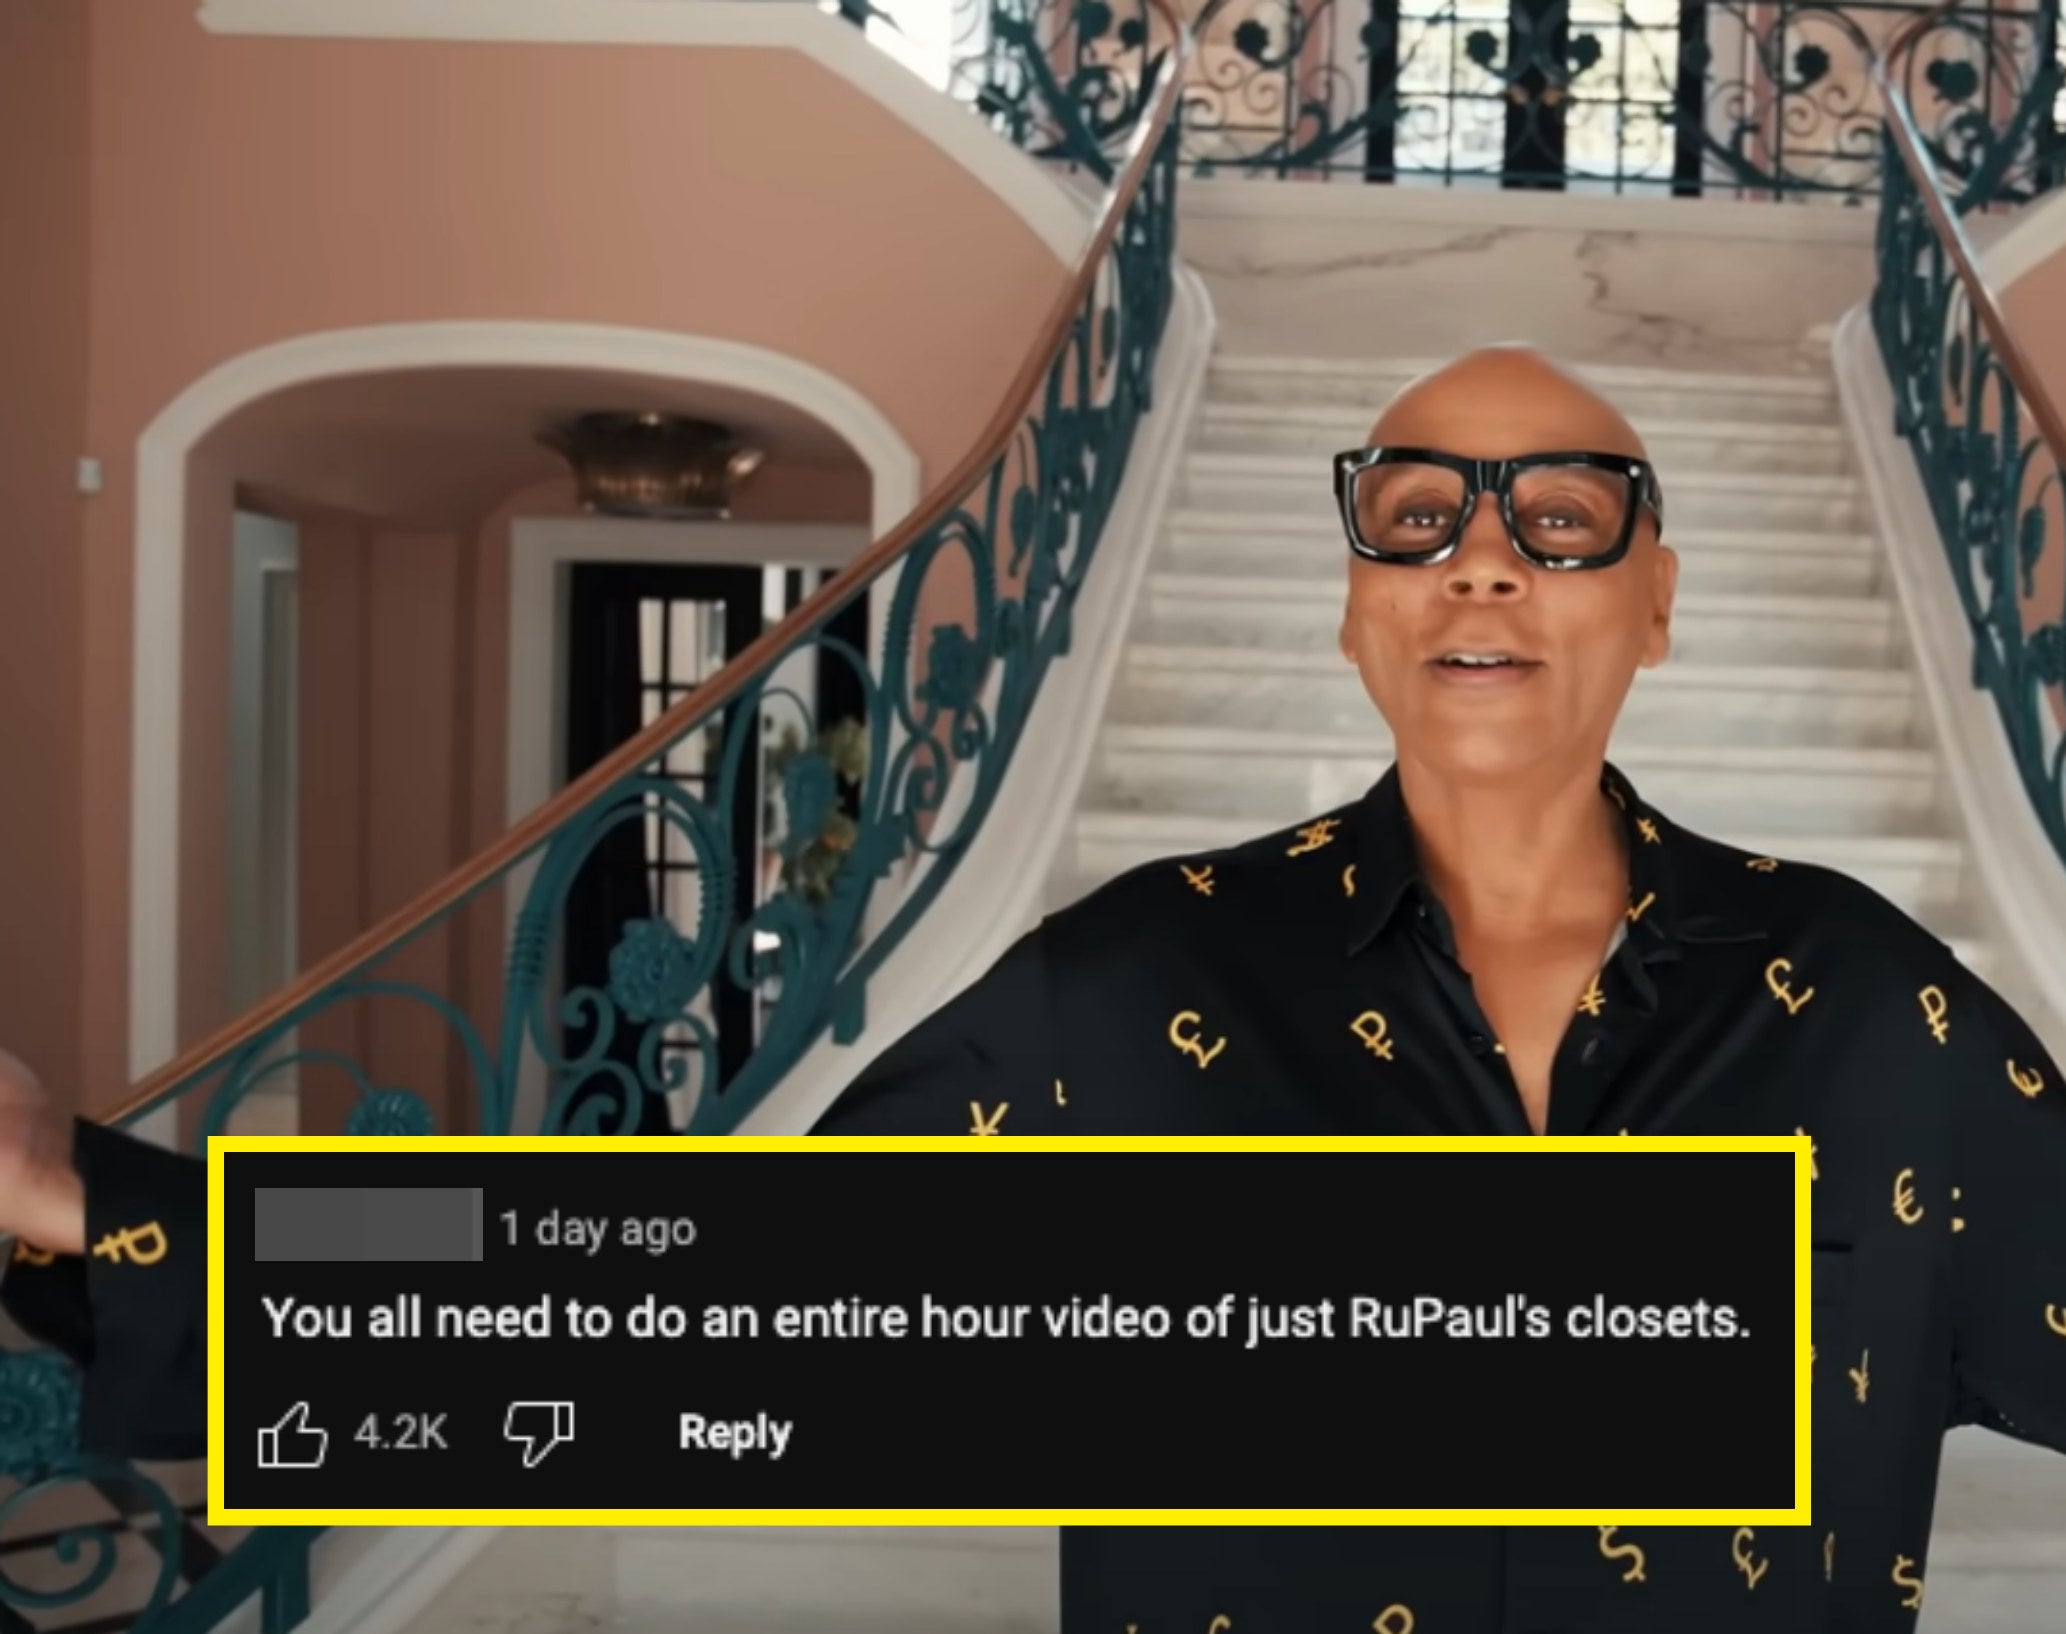 RuPaul walking down a staircase with a comment from YouTube saying: &quot;You all need to do an entire hour video of just RuPaul&#x27;s closets&quot;